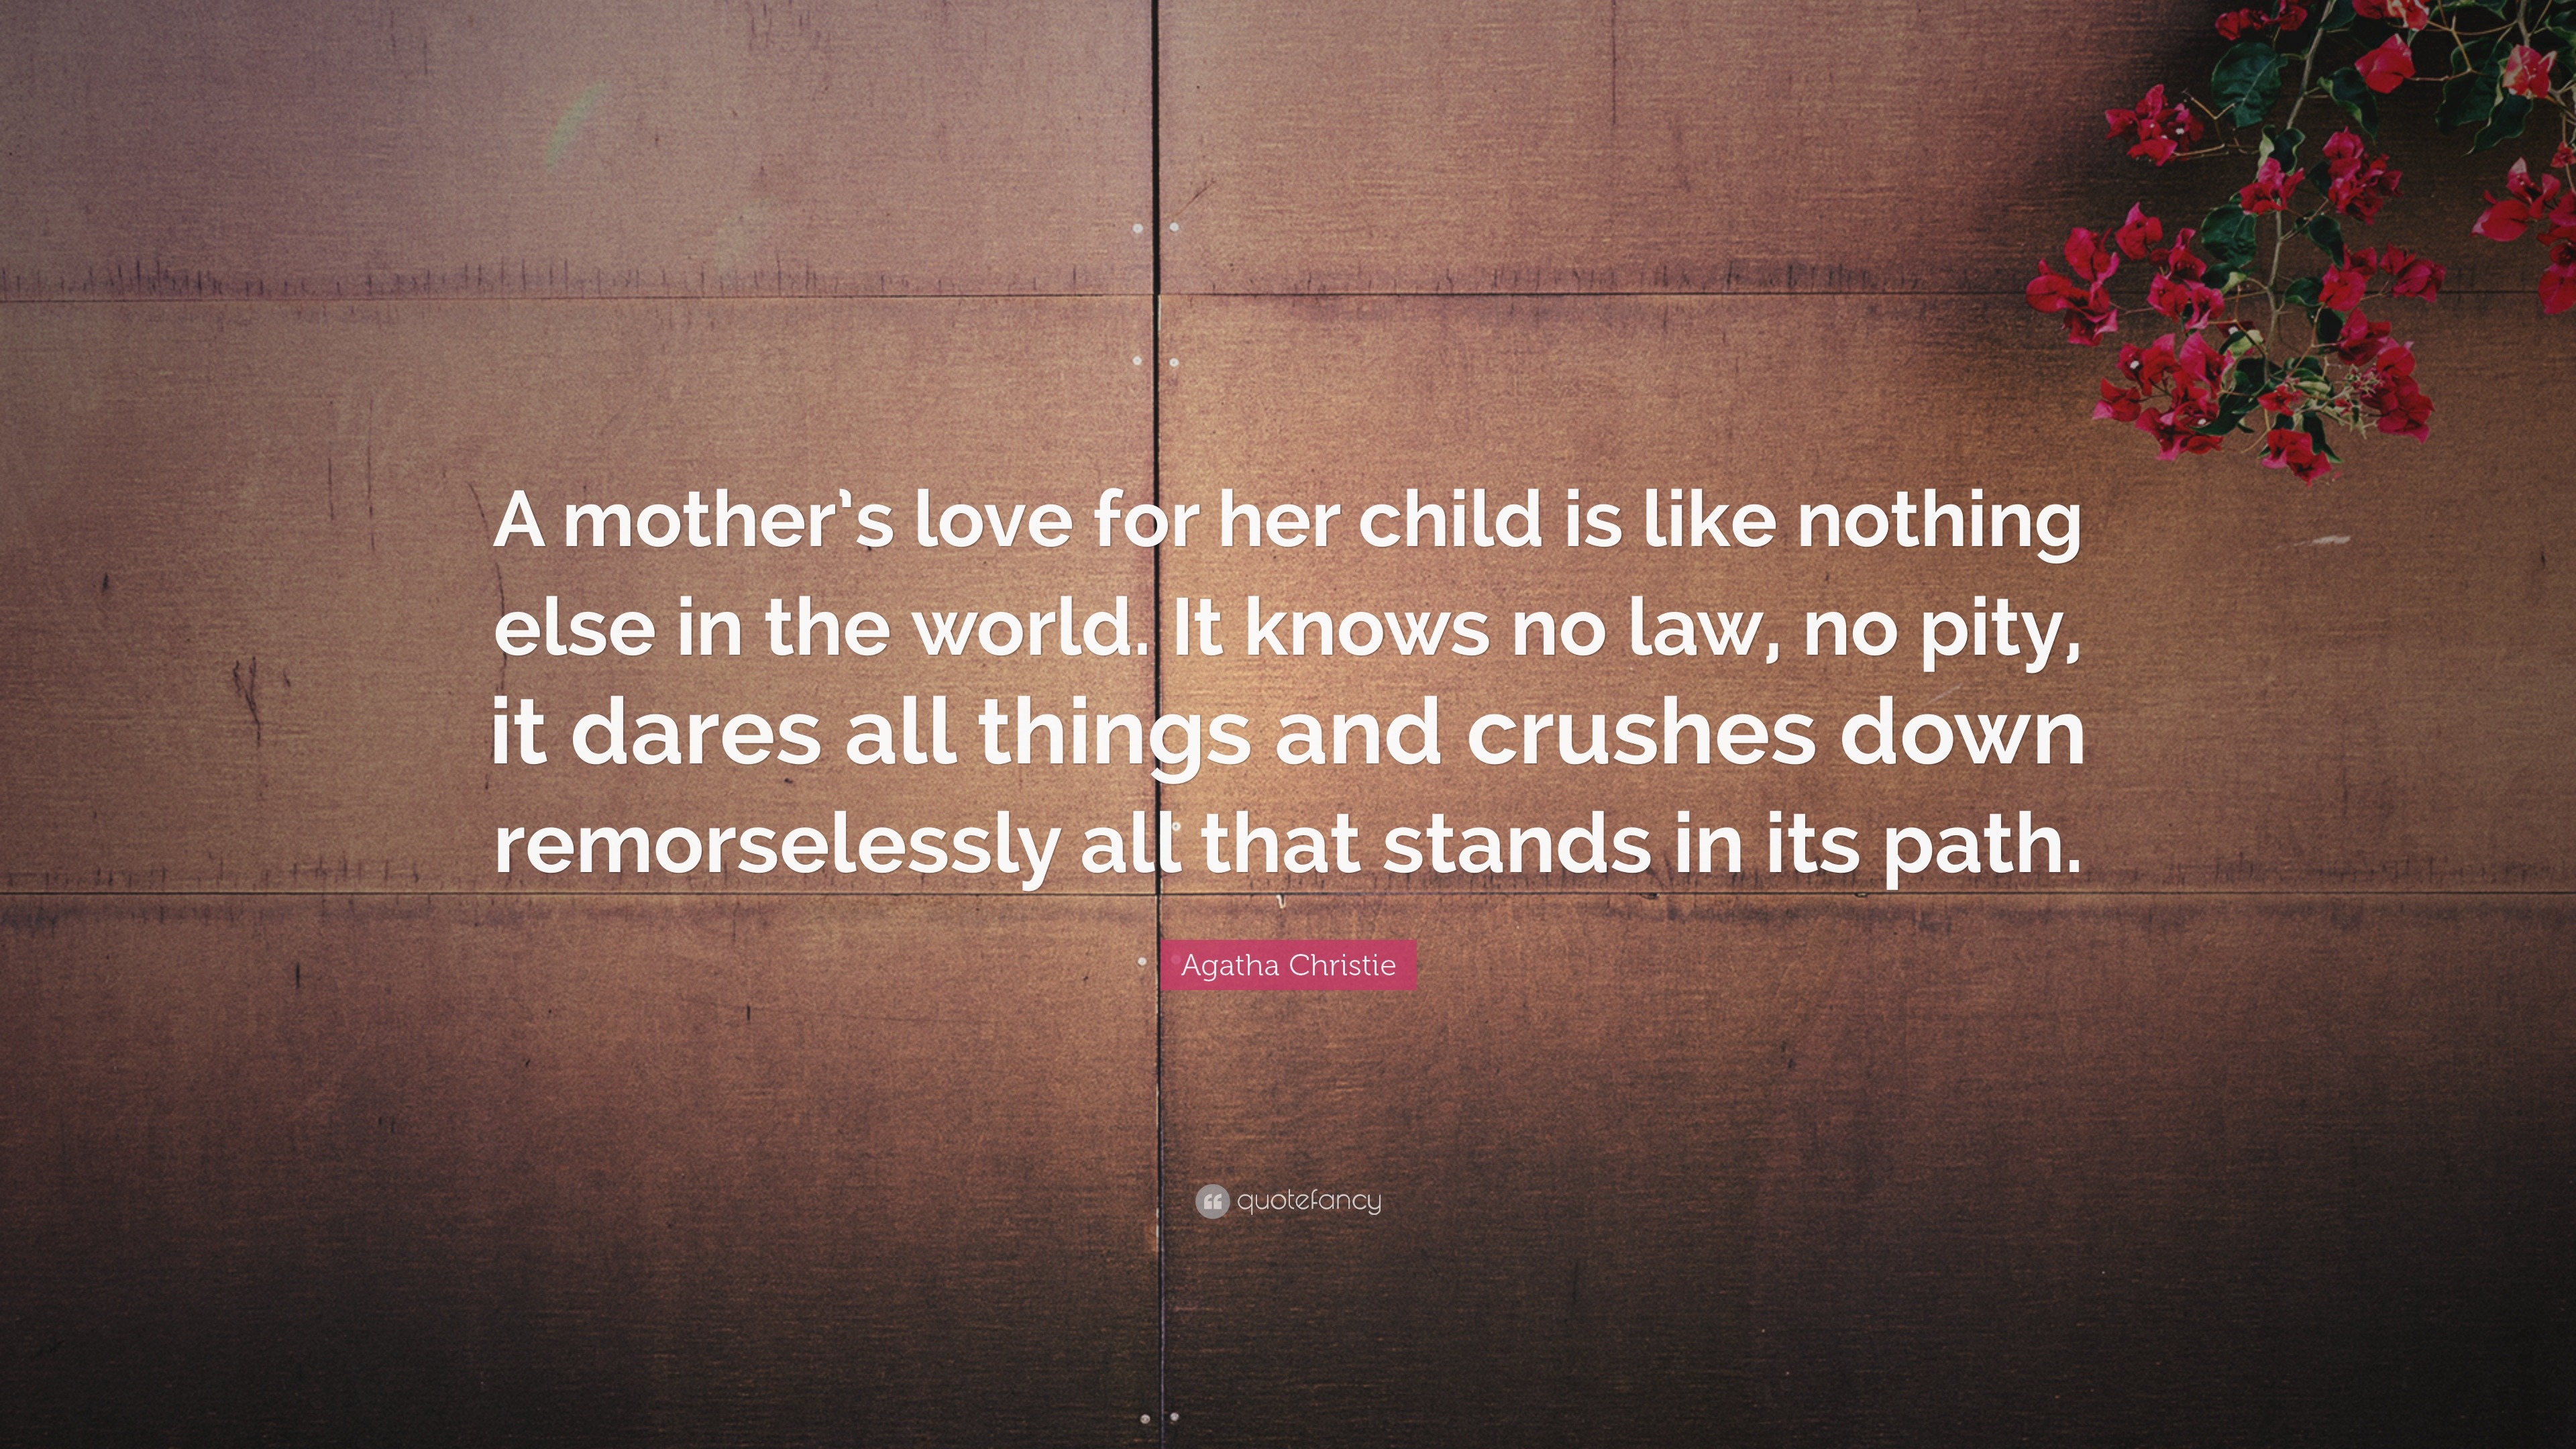 Agatha Christie Quote A Mother S Love For Her Child Is Like Nothing Else In The World It Knows No Law No Pity It Dares All Things And Crush 17 Wallpapers Quotefancy